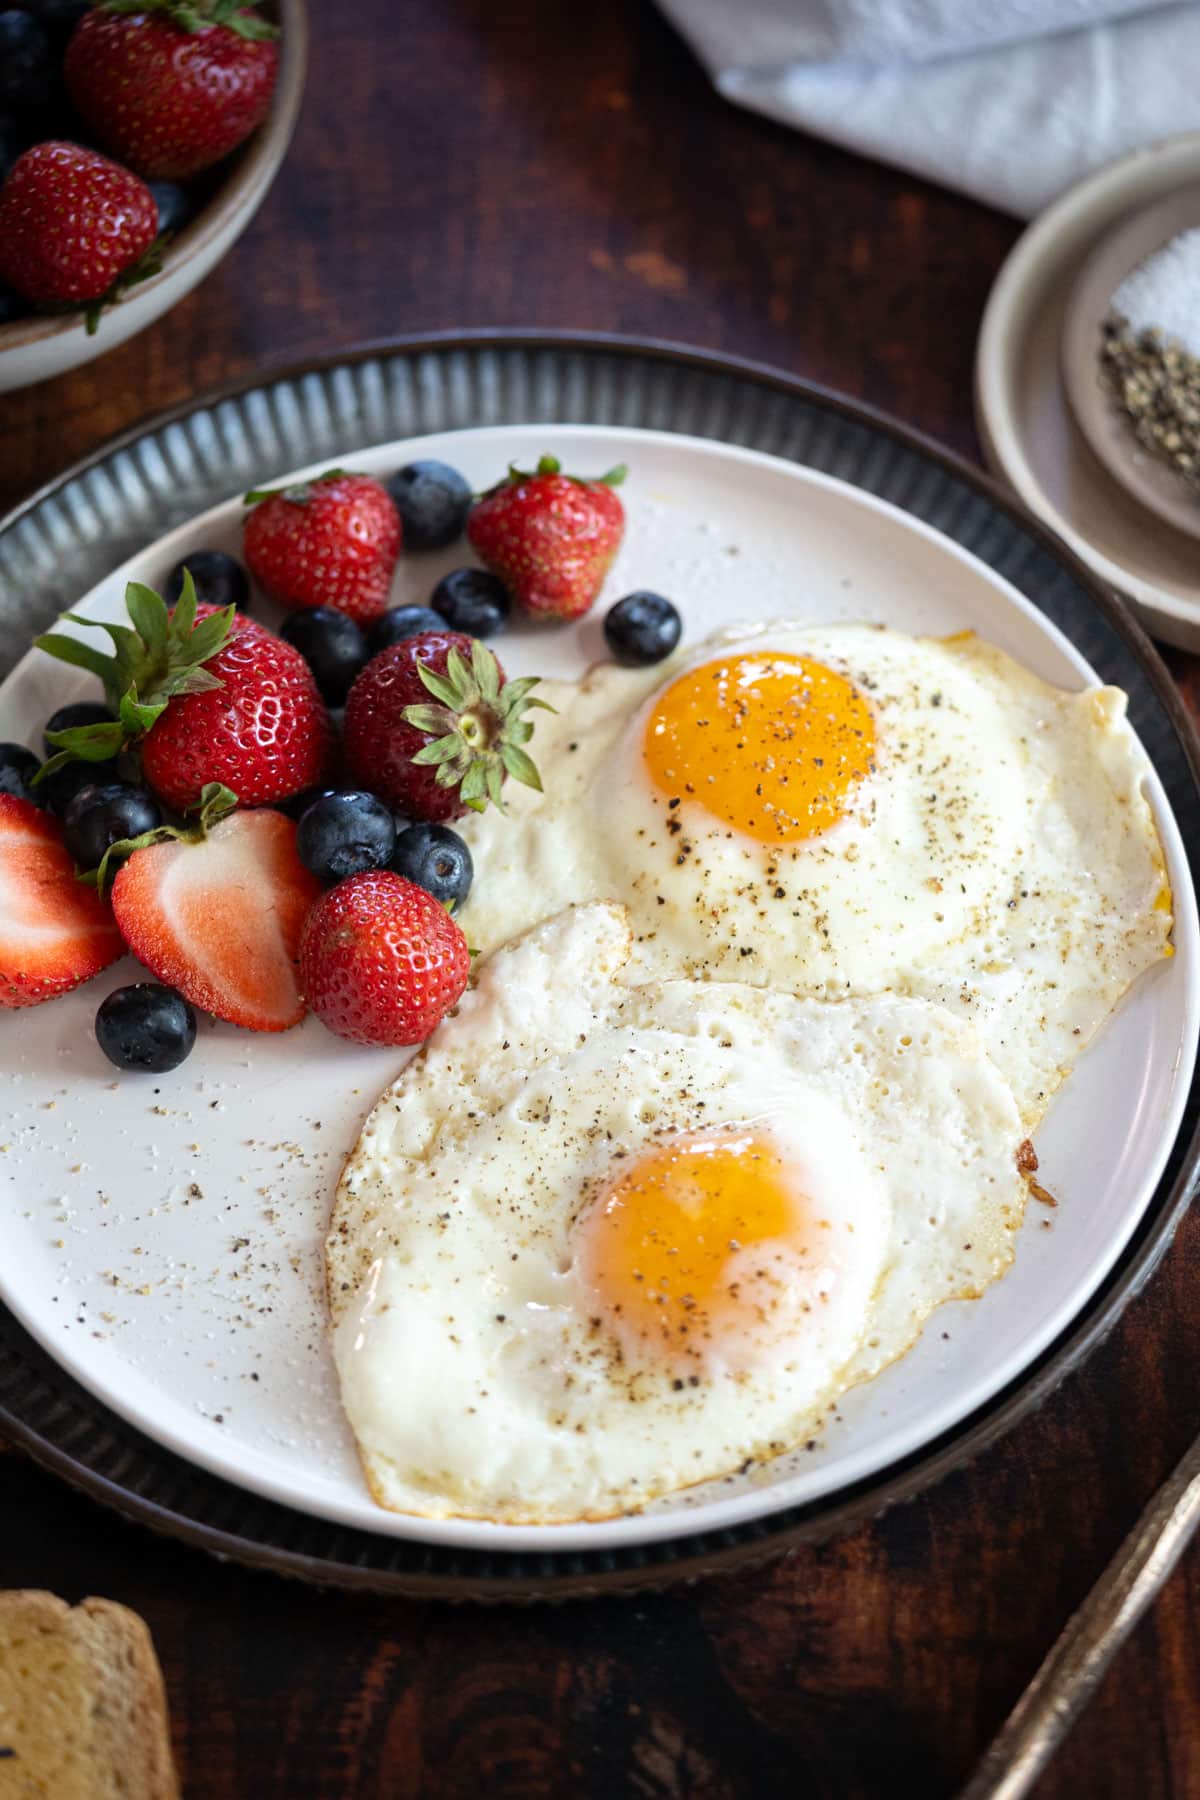 Sunny side up eggs with a plate of fruit.